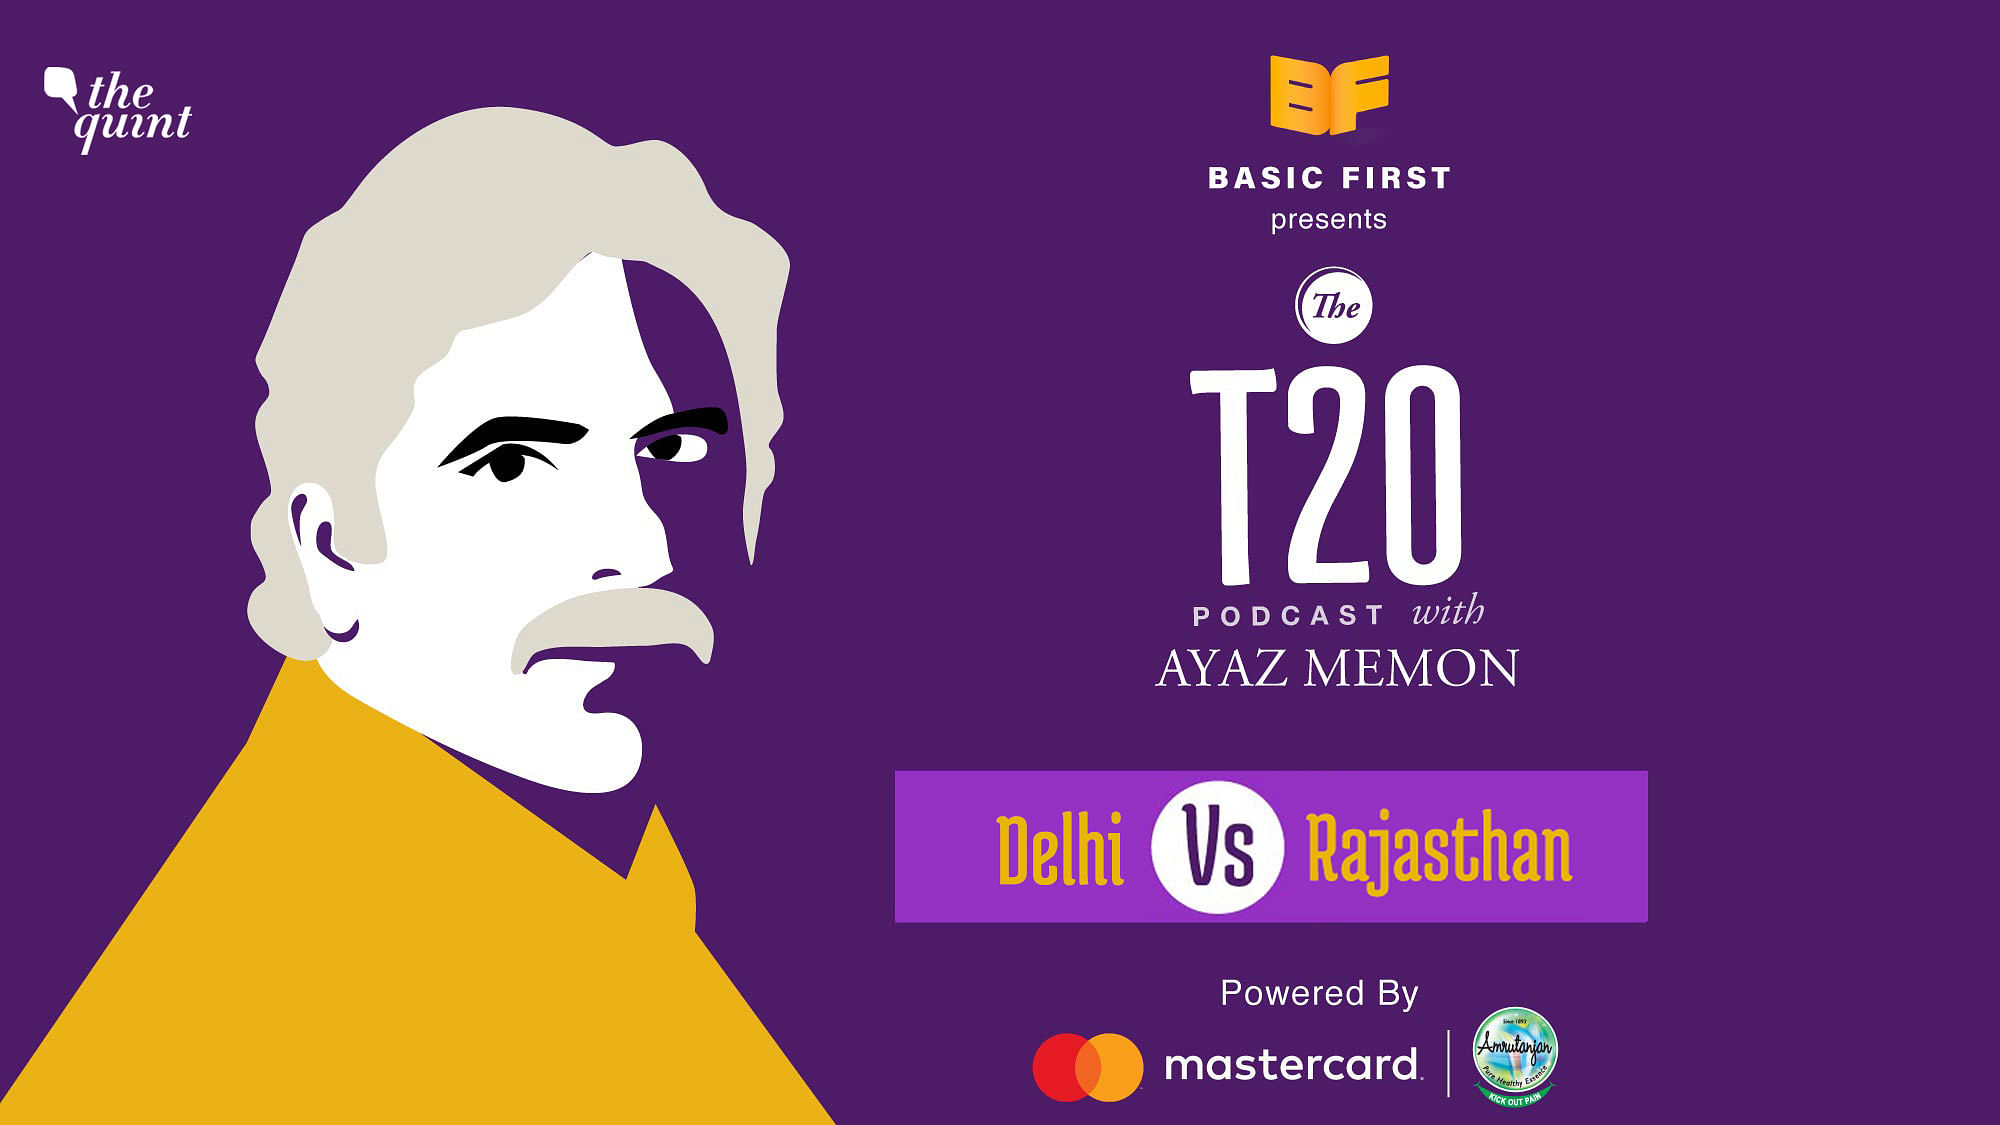 On Episode 30 of The T20 Podcast, Ayaz Memon and Mendra Dorjey talk about Delhi’s 13 run win over Rajasthan that helped them get back on top of the league standings with 12 points from 8 outings.